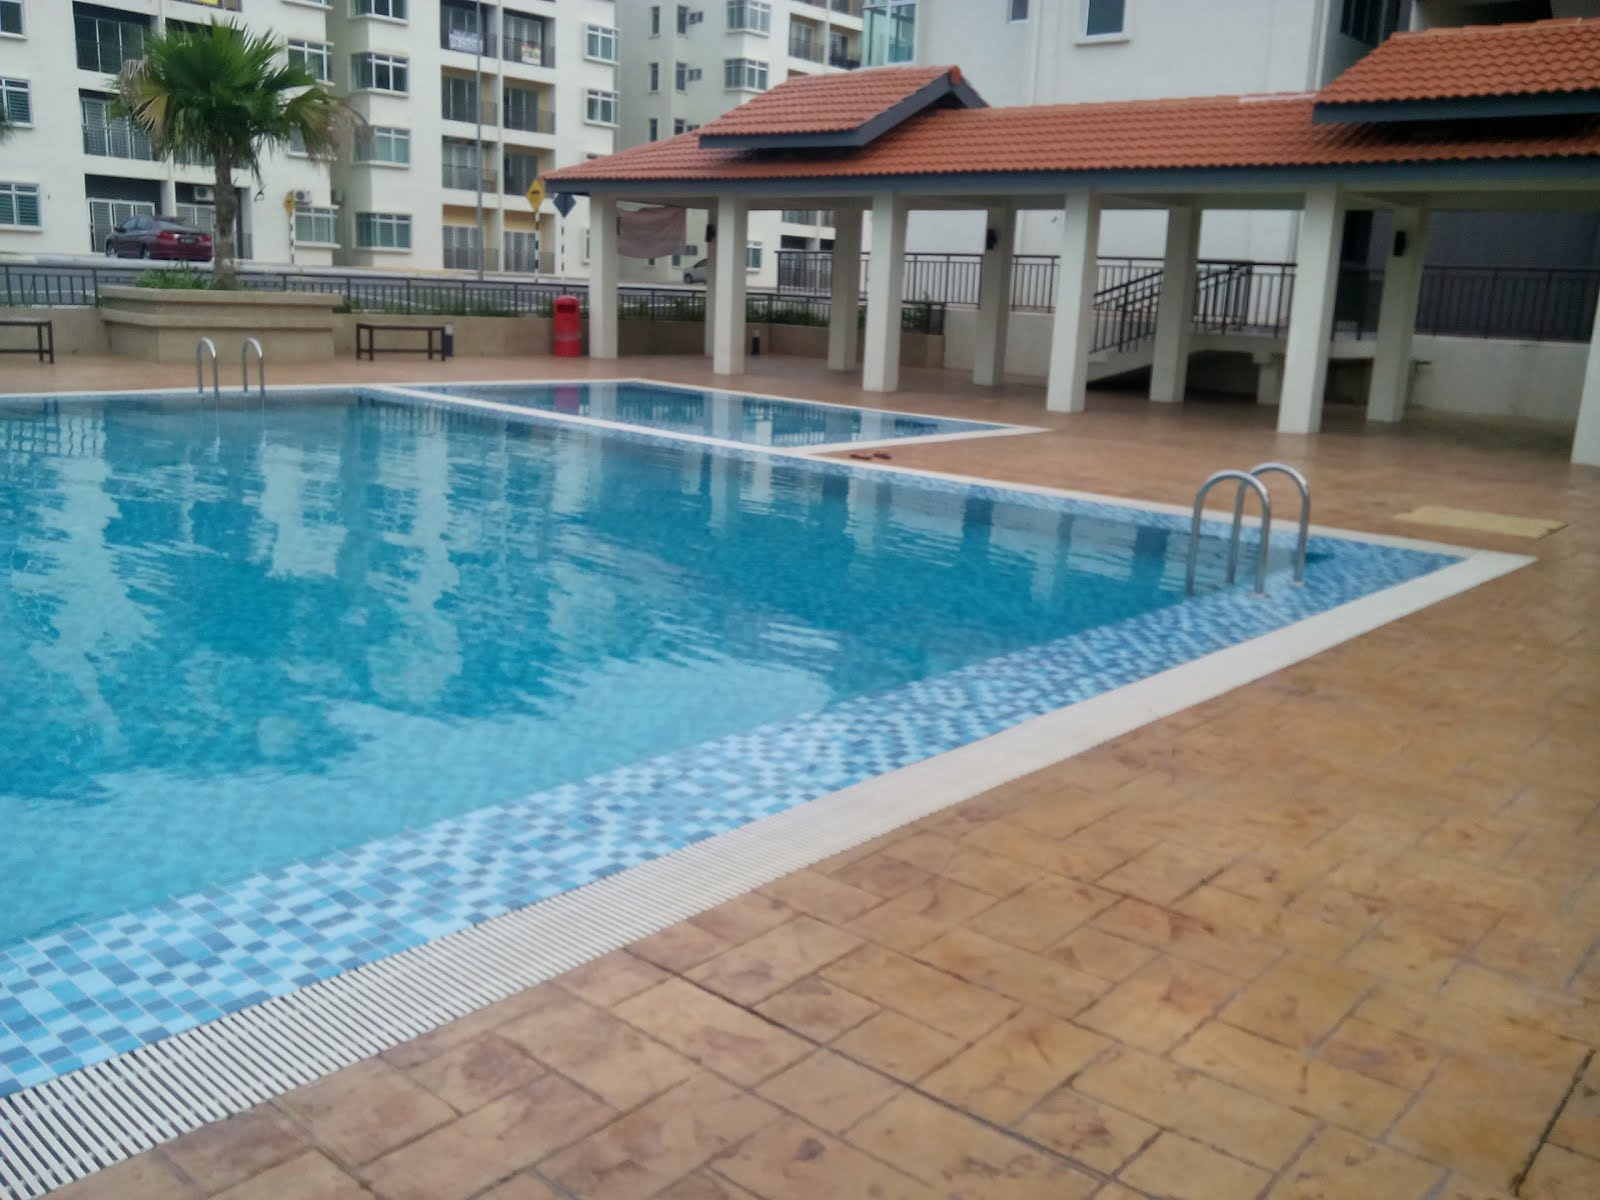 SWIMMING POOL FOR ADULT & CHILDREN